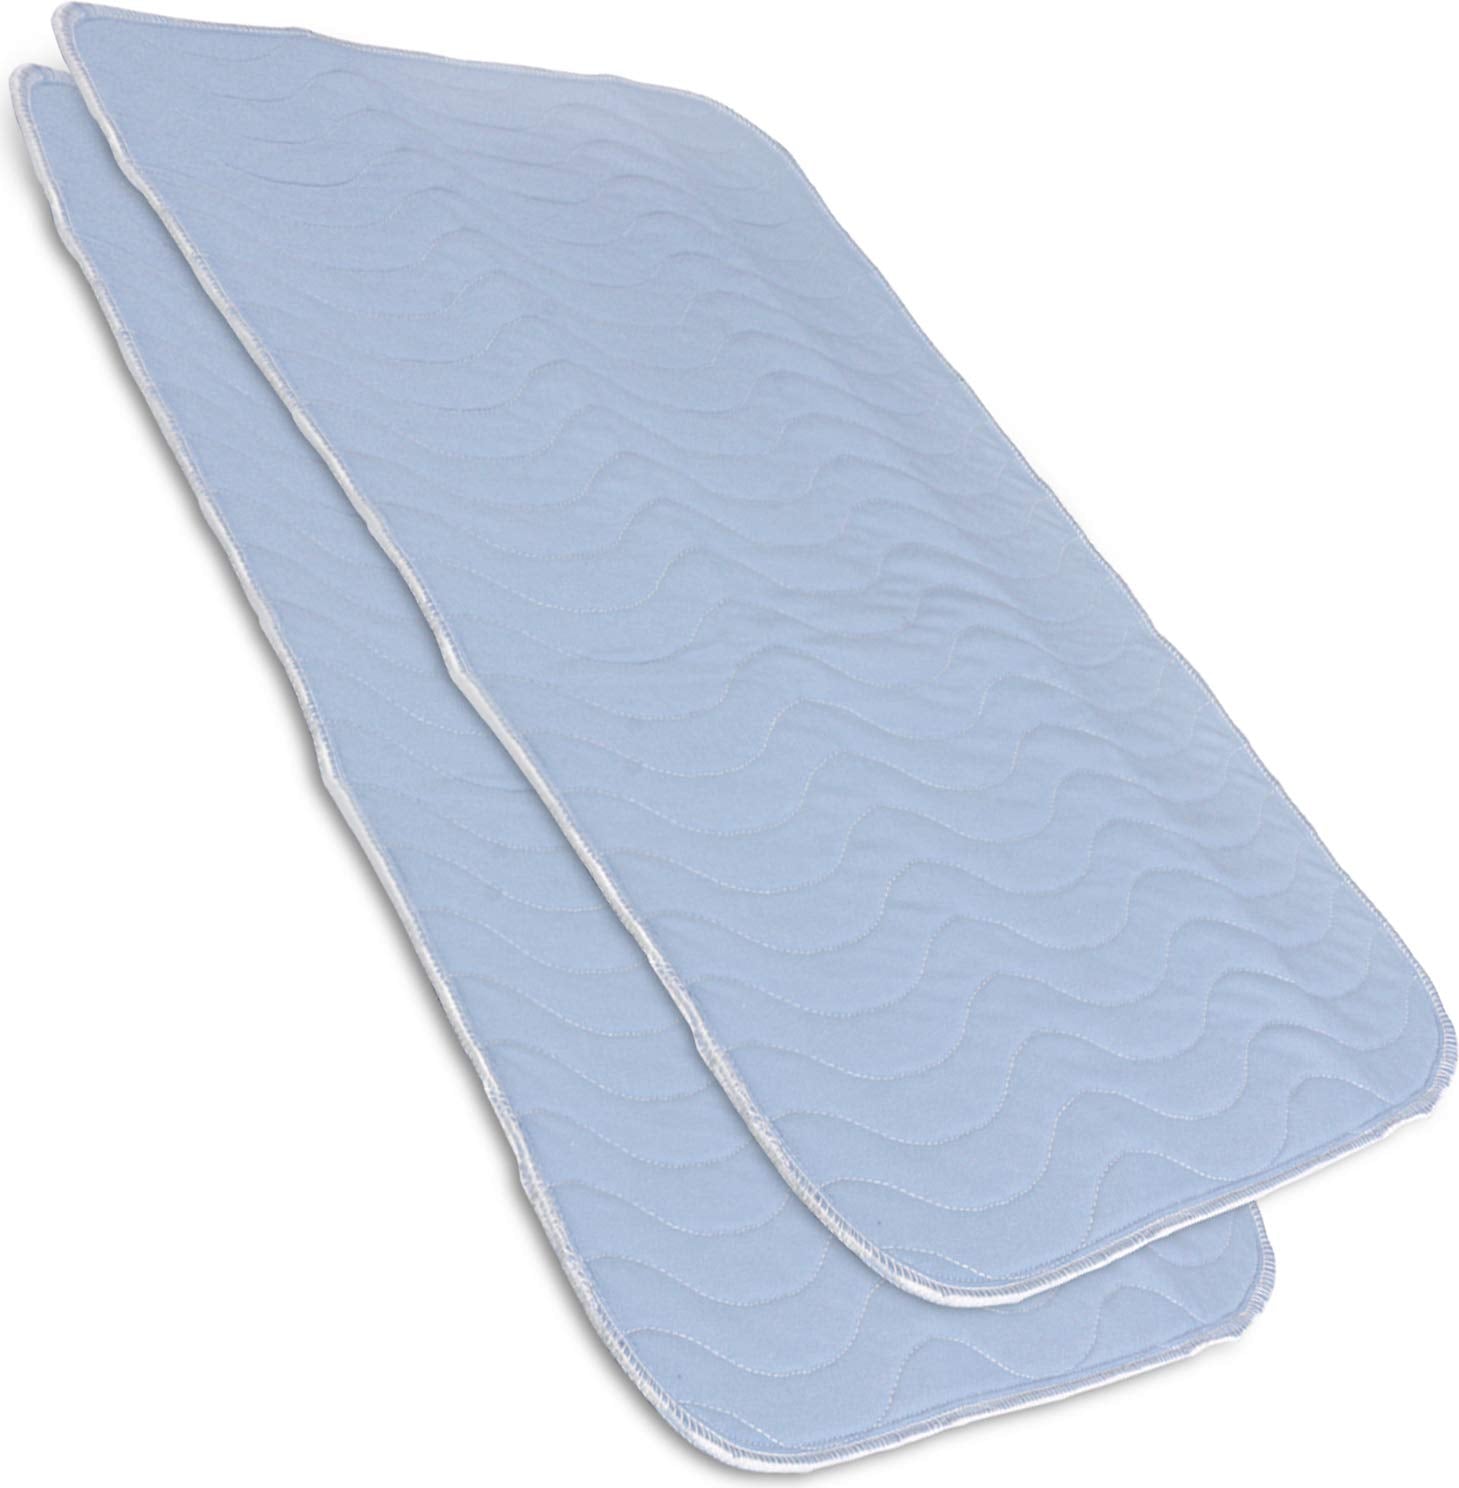 4 Pack Utopia Bedding Underpads Quilted Waterproof Incontinence